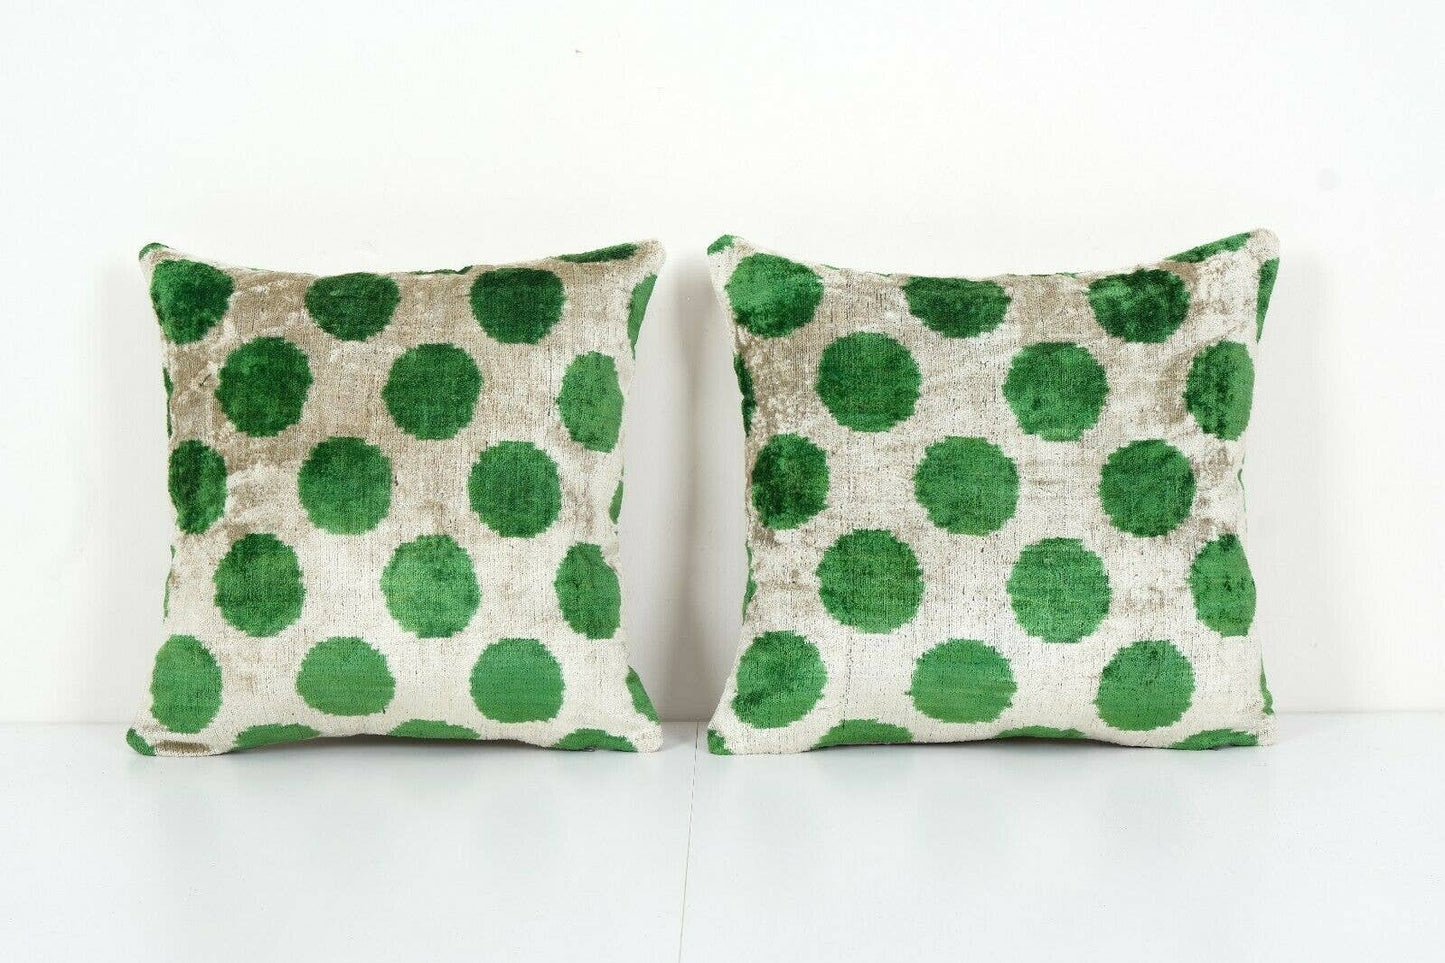 Polka Dot Green Silk Ikat Velvet Pillow - Set of Two Decorative Pillows Covers - Curated Home Decor